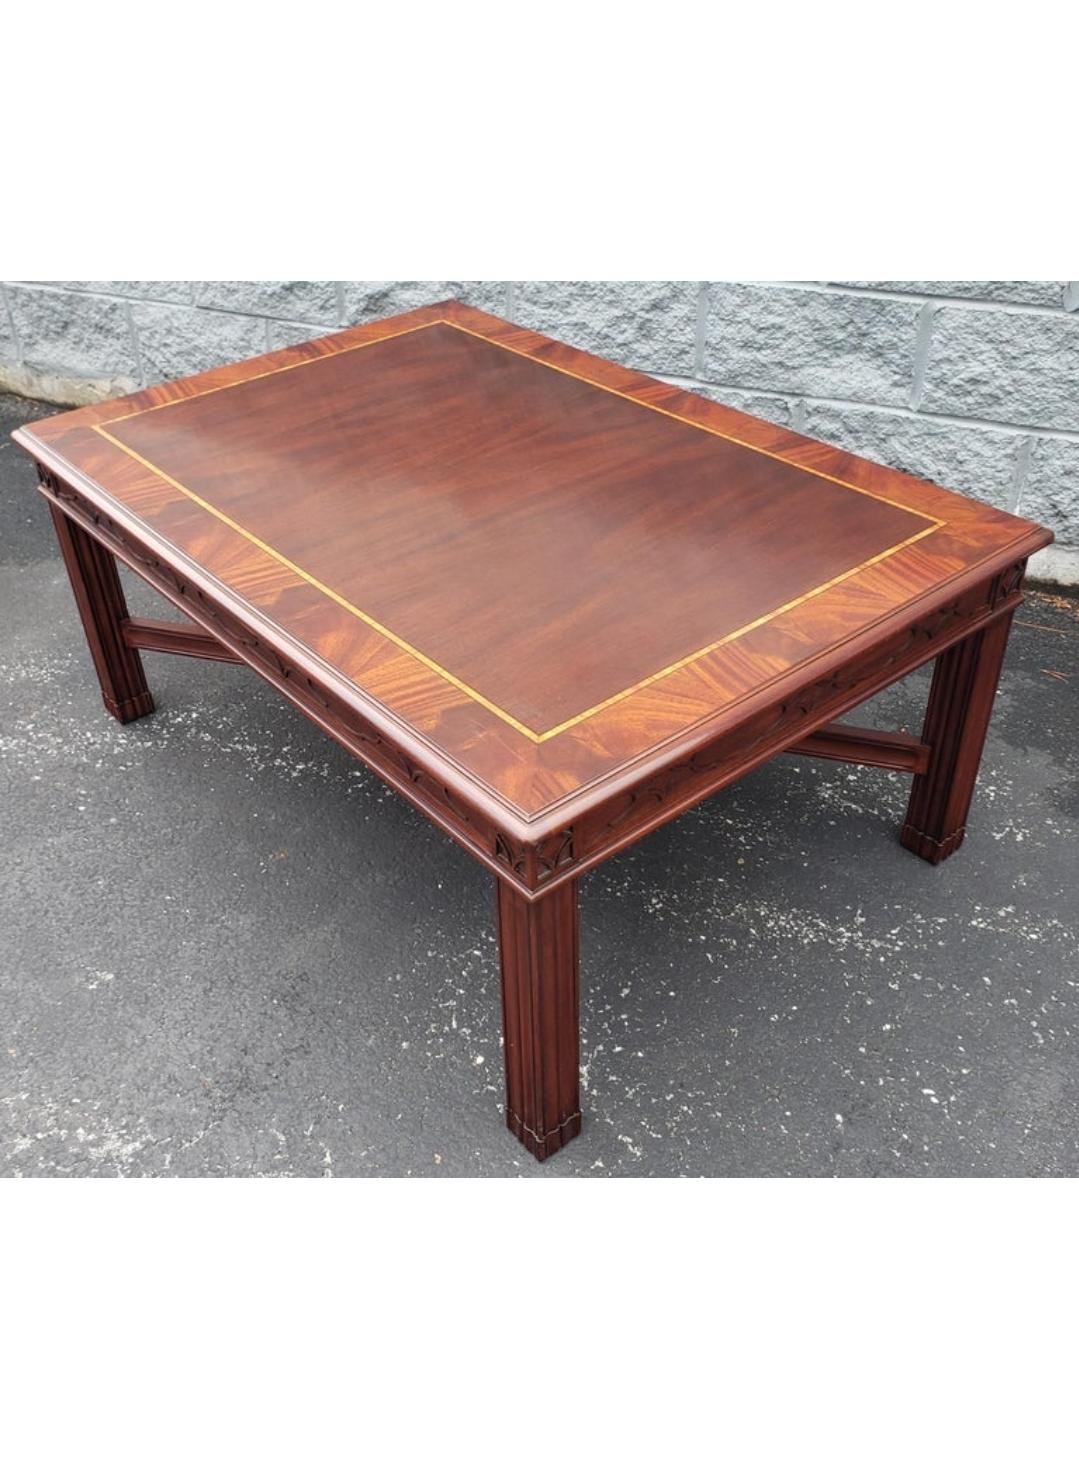 Modern Henkel Harris Chippendale Mahogany and Tulipwood Inlay Coffee Table w/ Fretwork For Sale